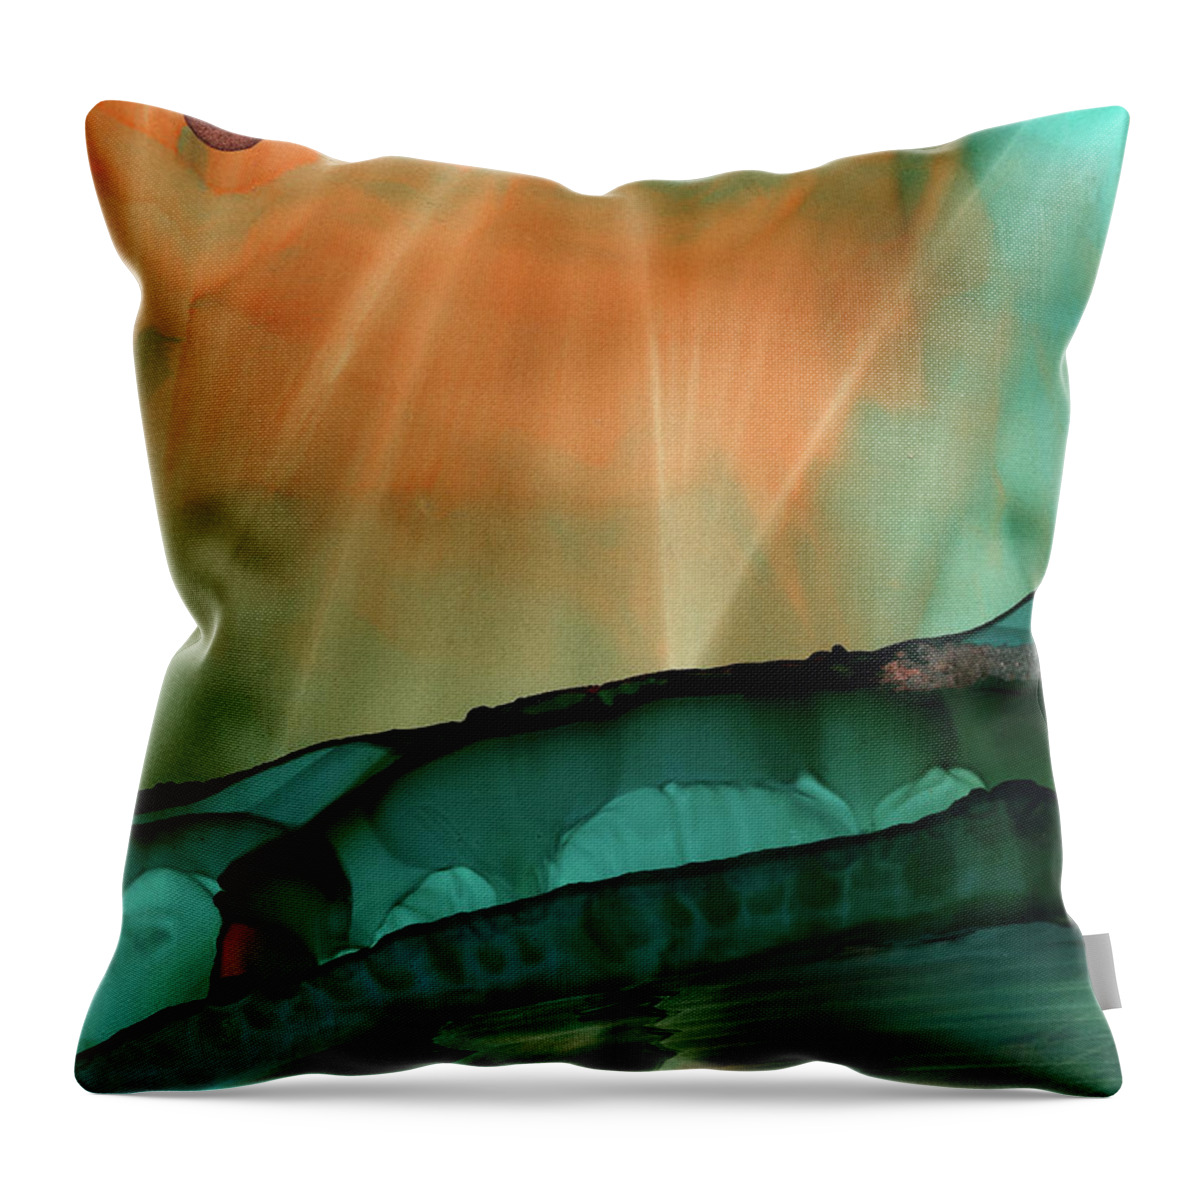  Throw Pillow featuring the painting Beyond The City Lights #1 by Eli Tynan